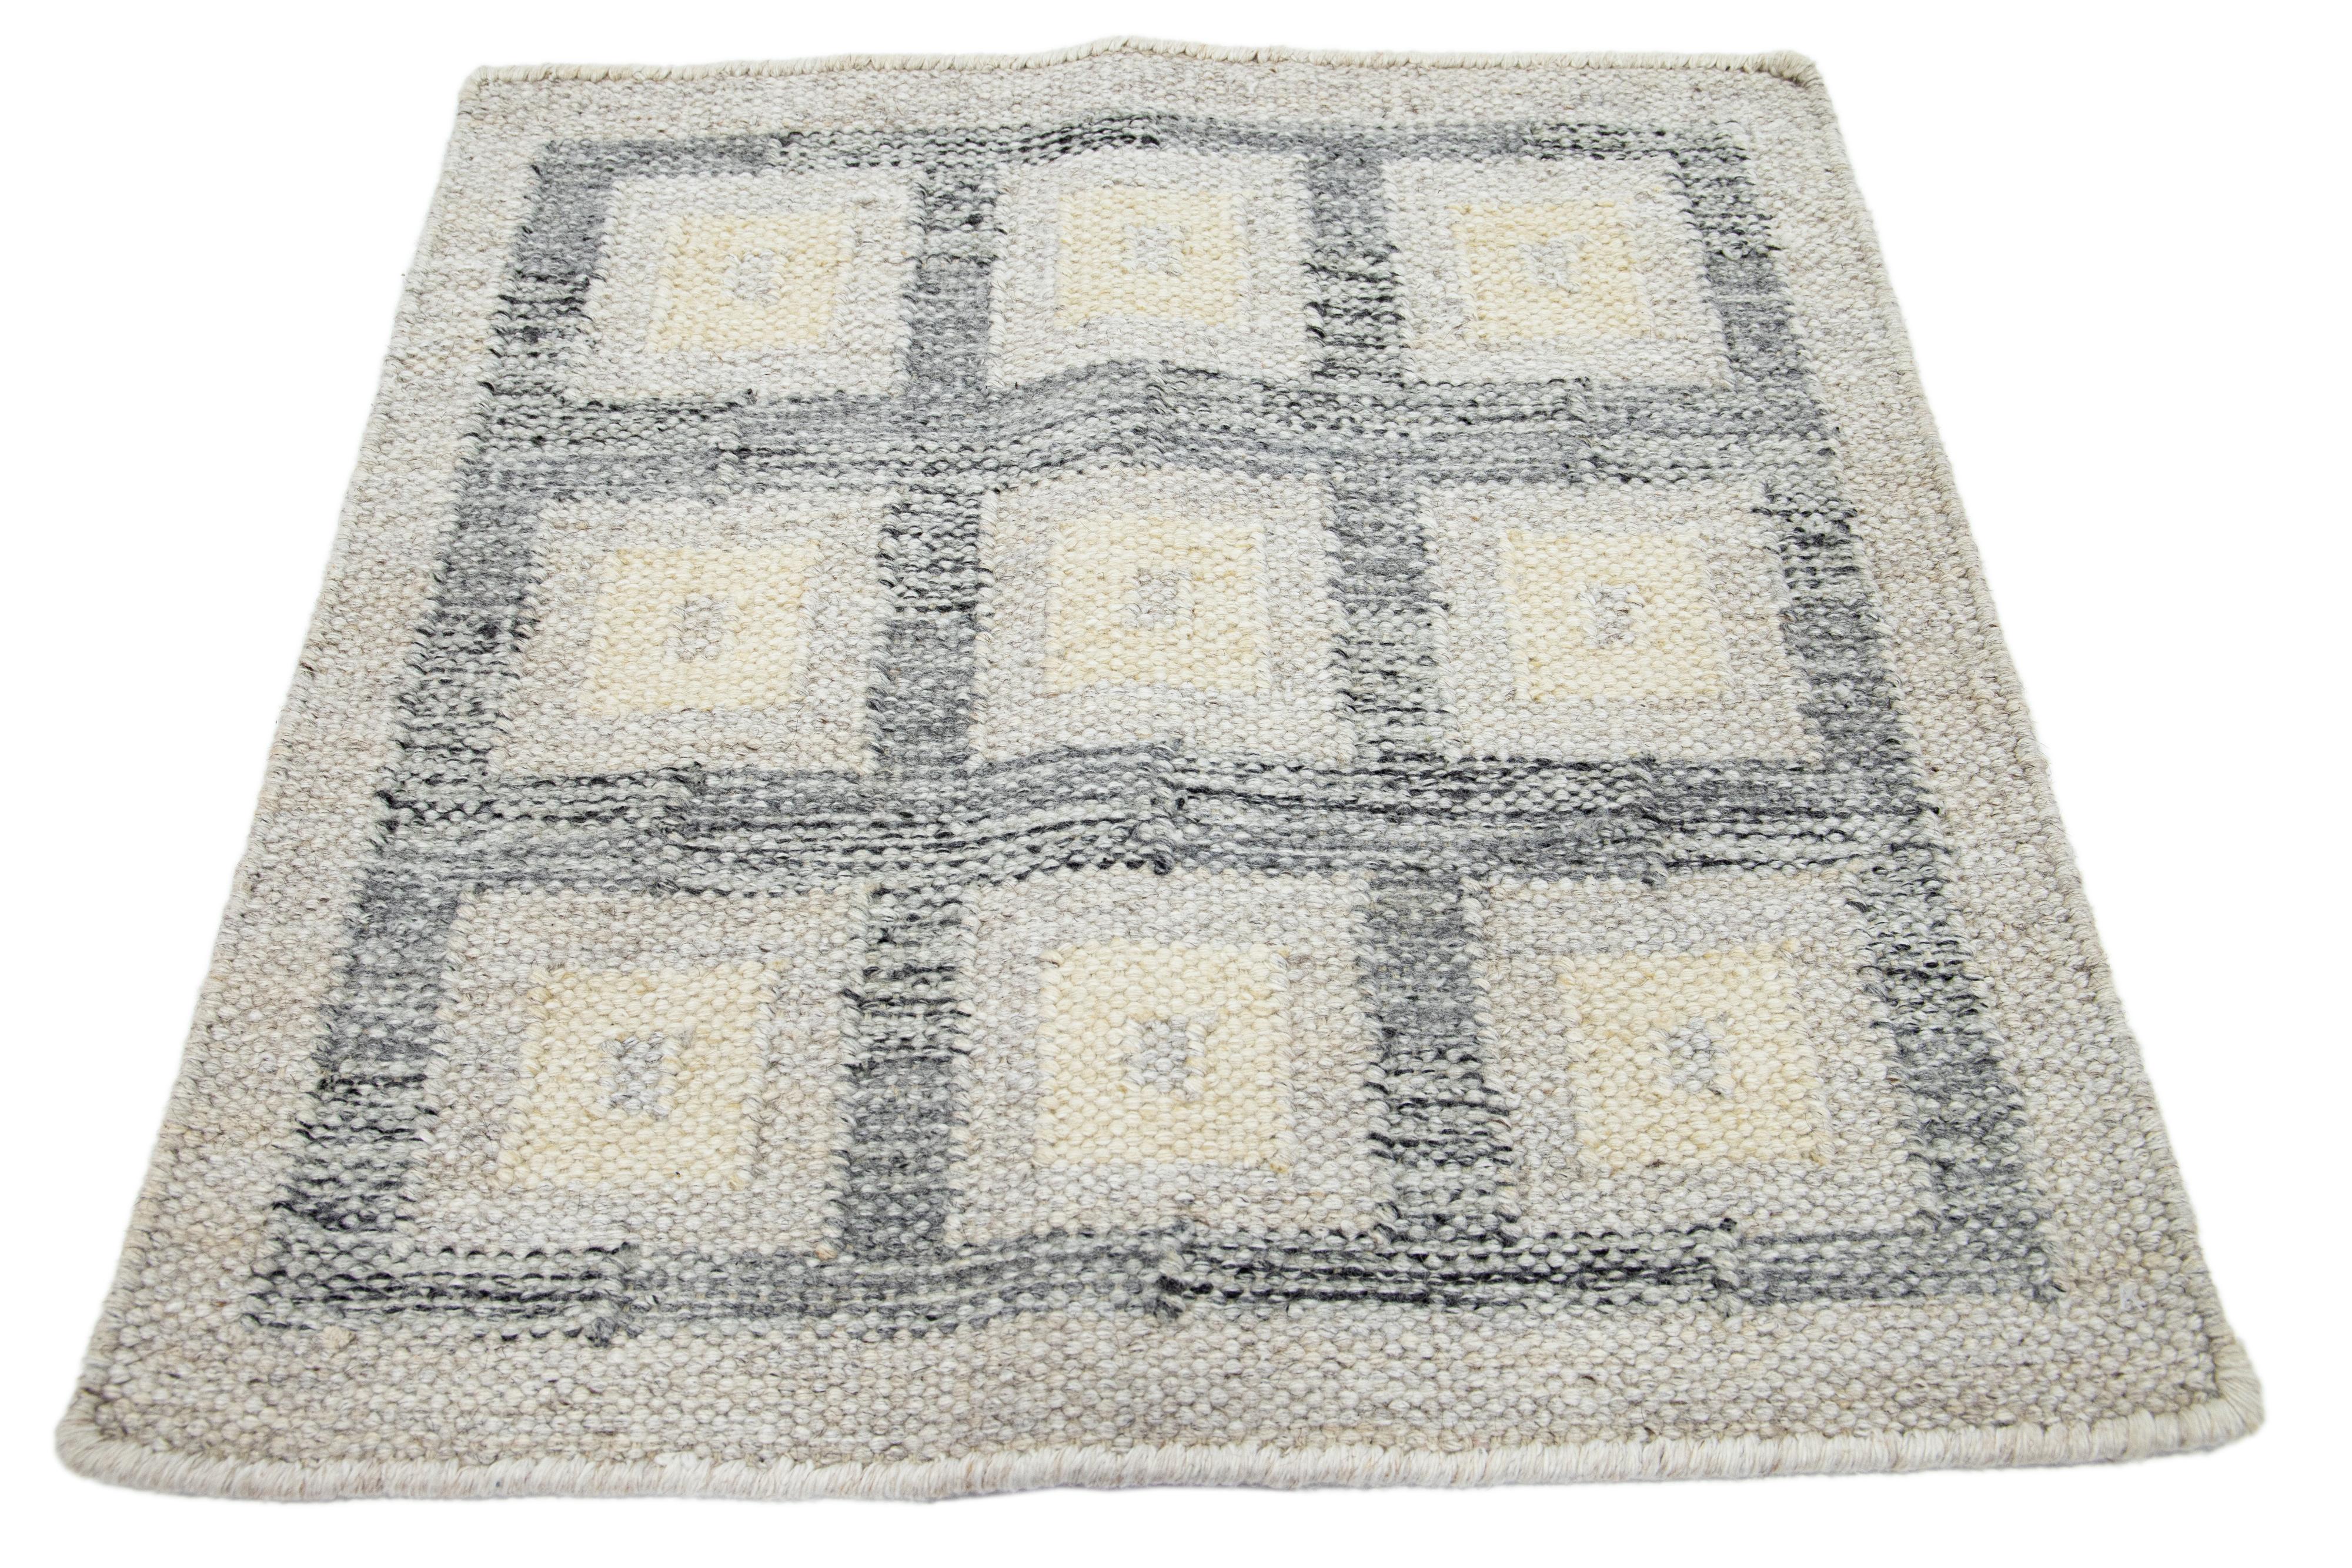 Apadana's Modern Swedish Style handwoven wool custom rug. Custom sizes and colors made-to-order. 

Material: Wool 
Techniques: Hand-Woven
Style: Swedish 
Lead time: Approx. 15-16 wks available 
Colors: As shown, other custom colors are